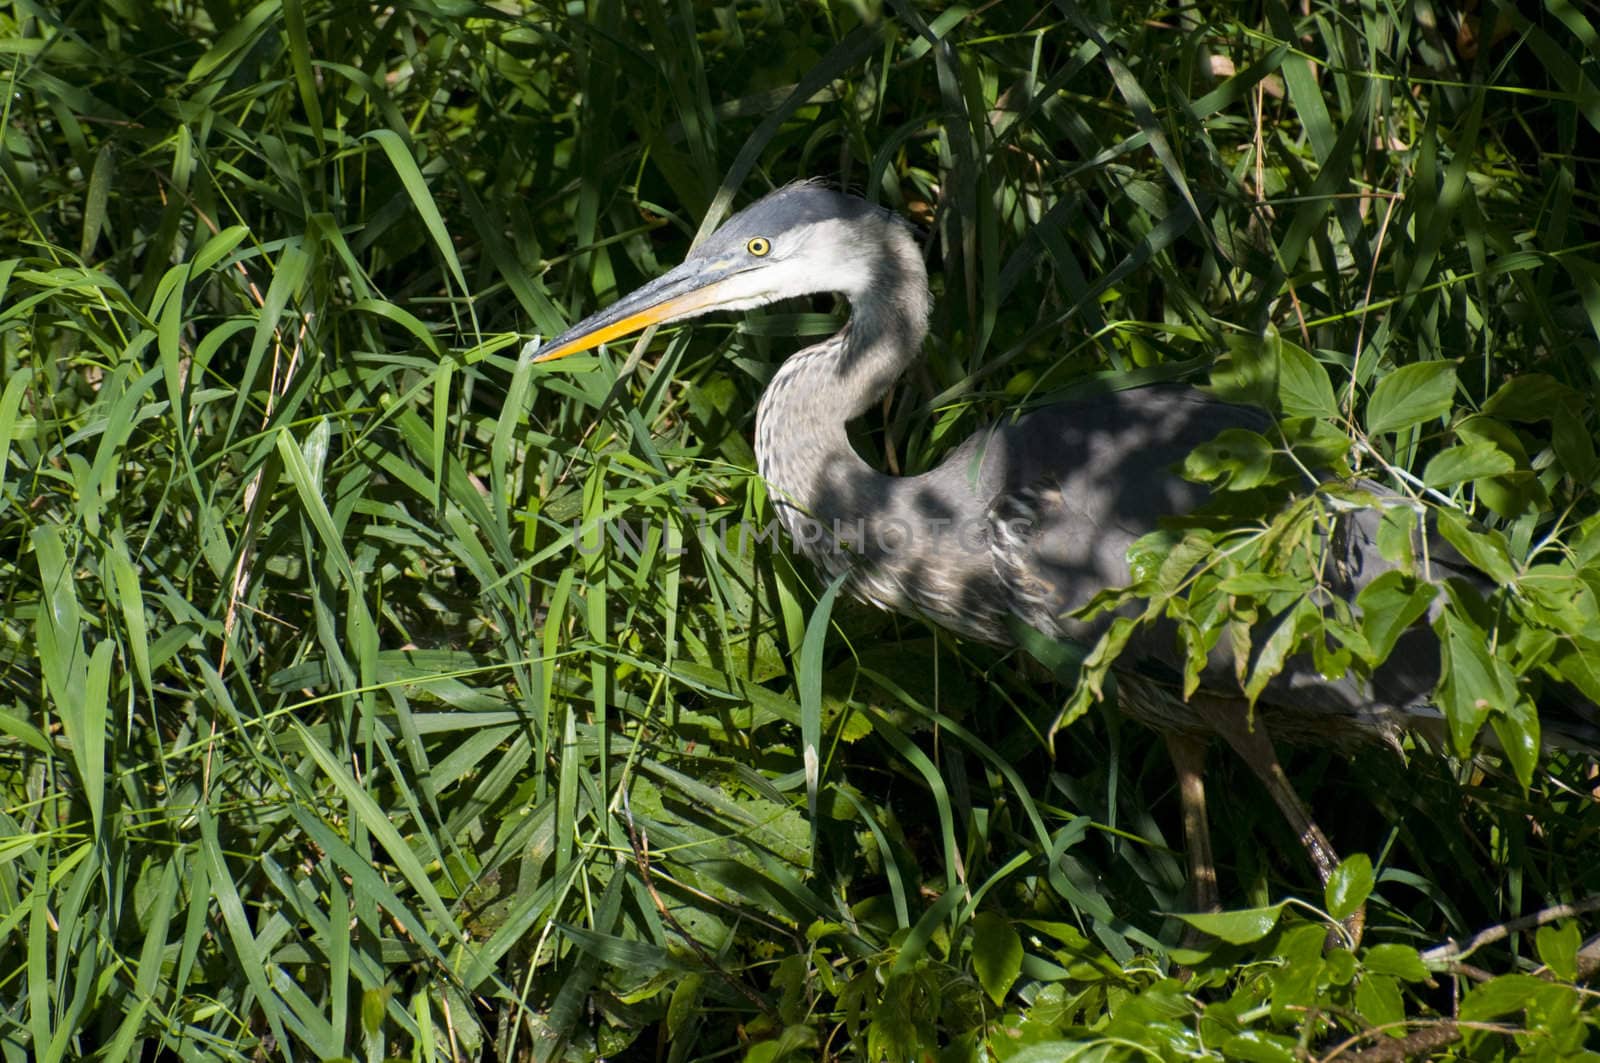 Blue heron looks out from his hiding place in the long grass in a marshland